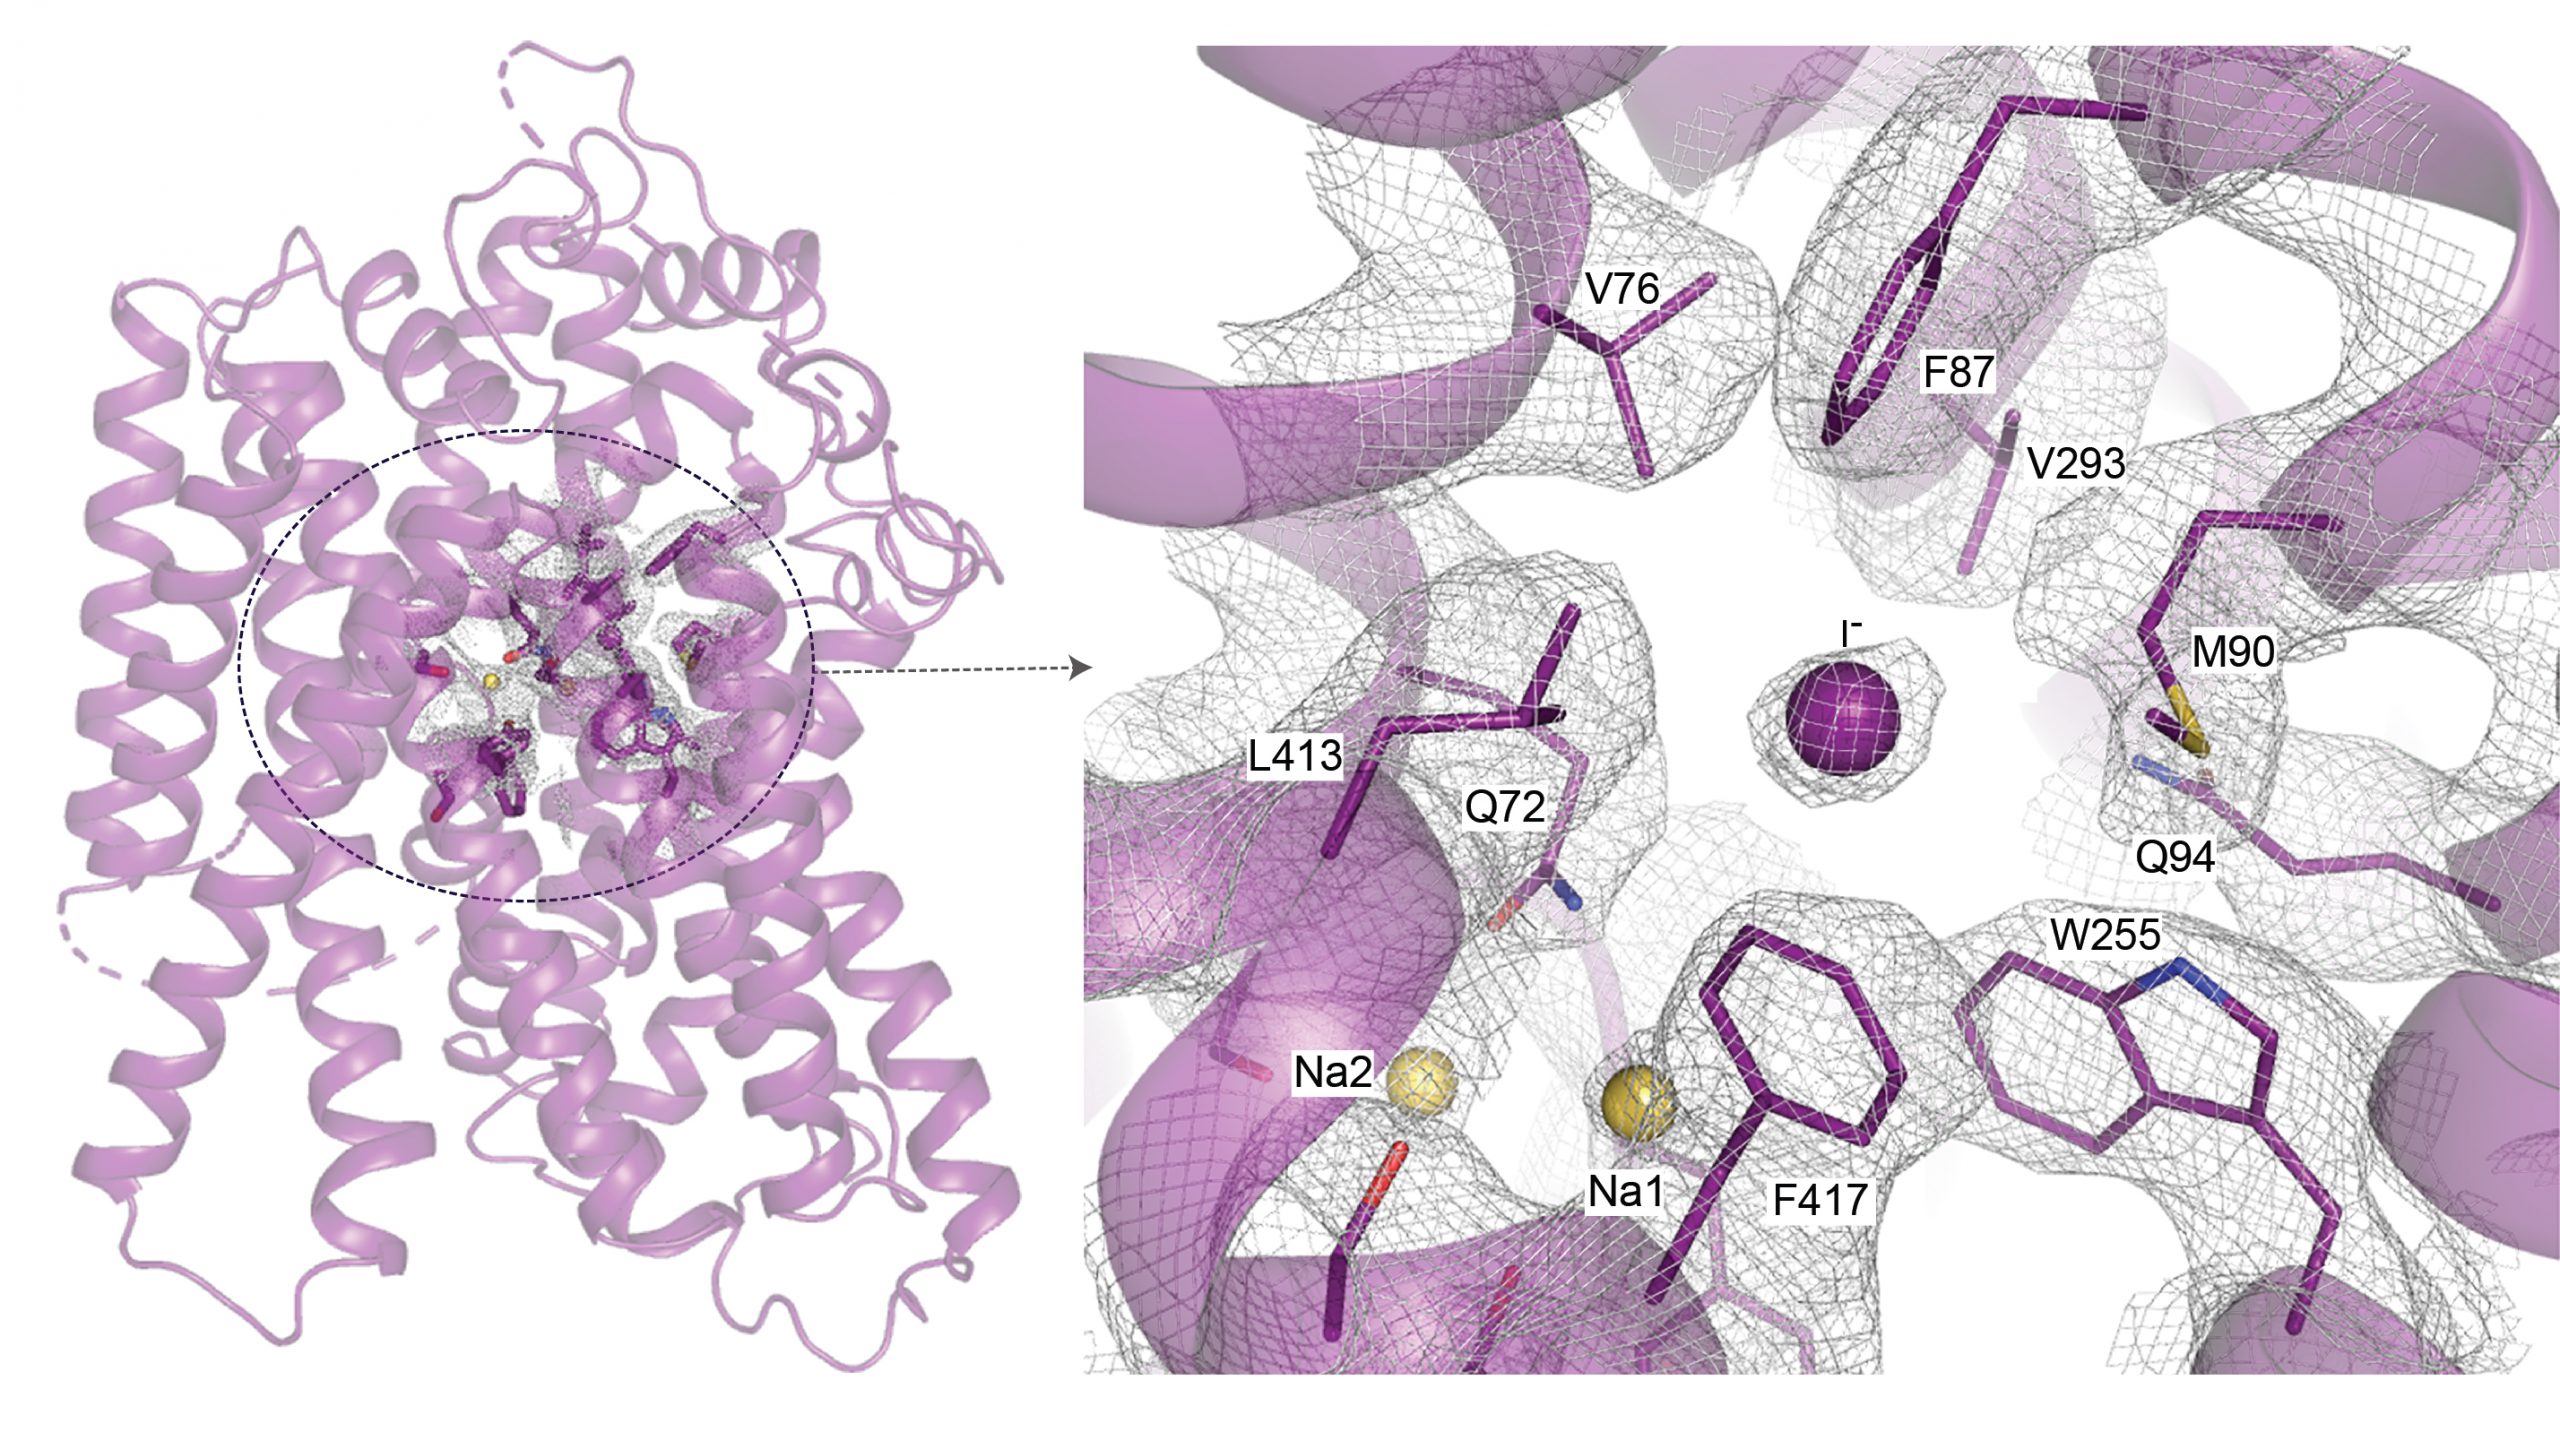 Researchers determine the structure of key thyroid iodide transporter